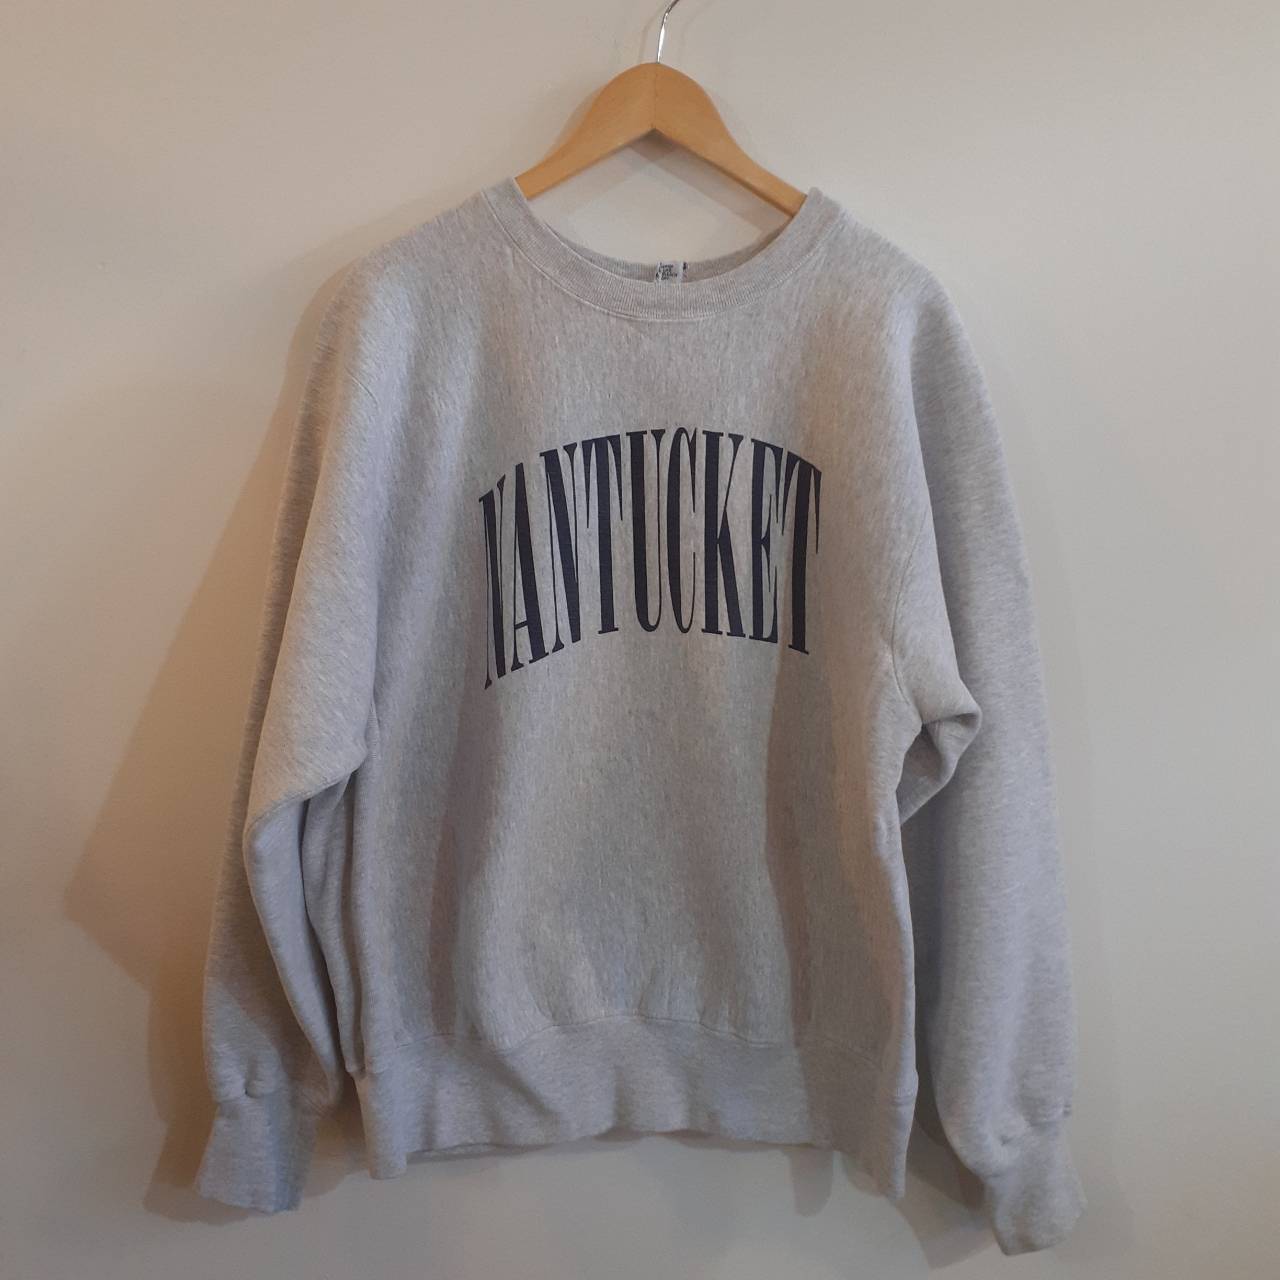 90s The cotton exchange reverse weave type sweat (made in USA